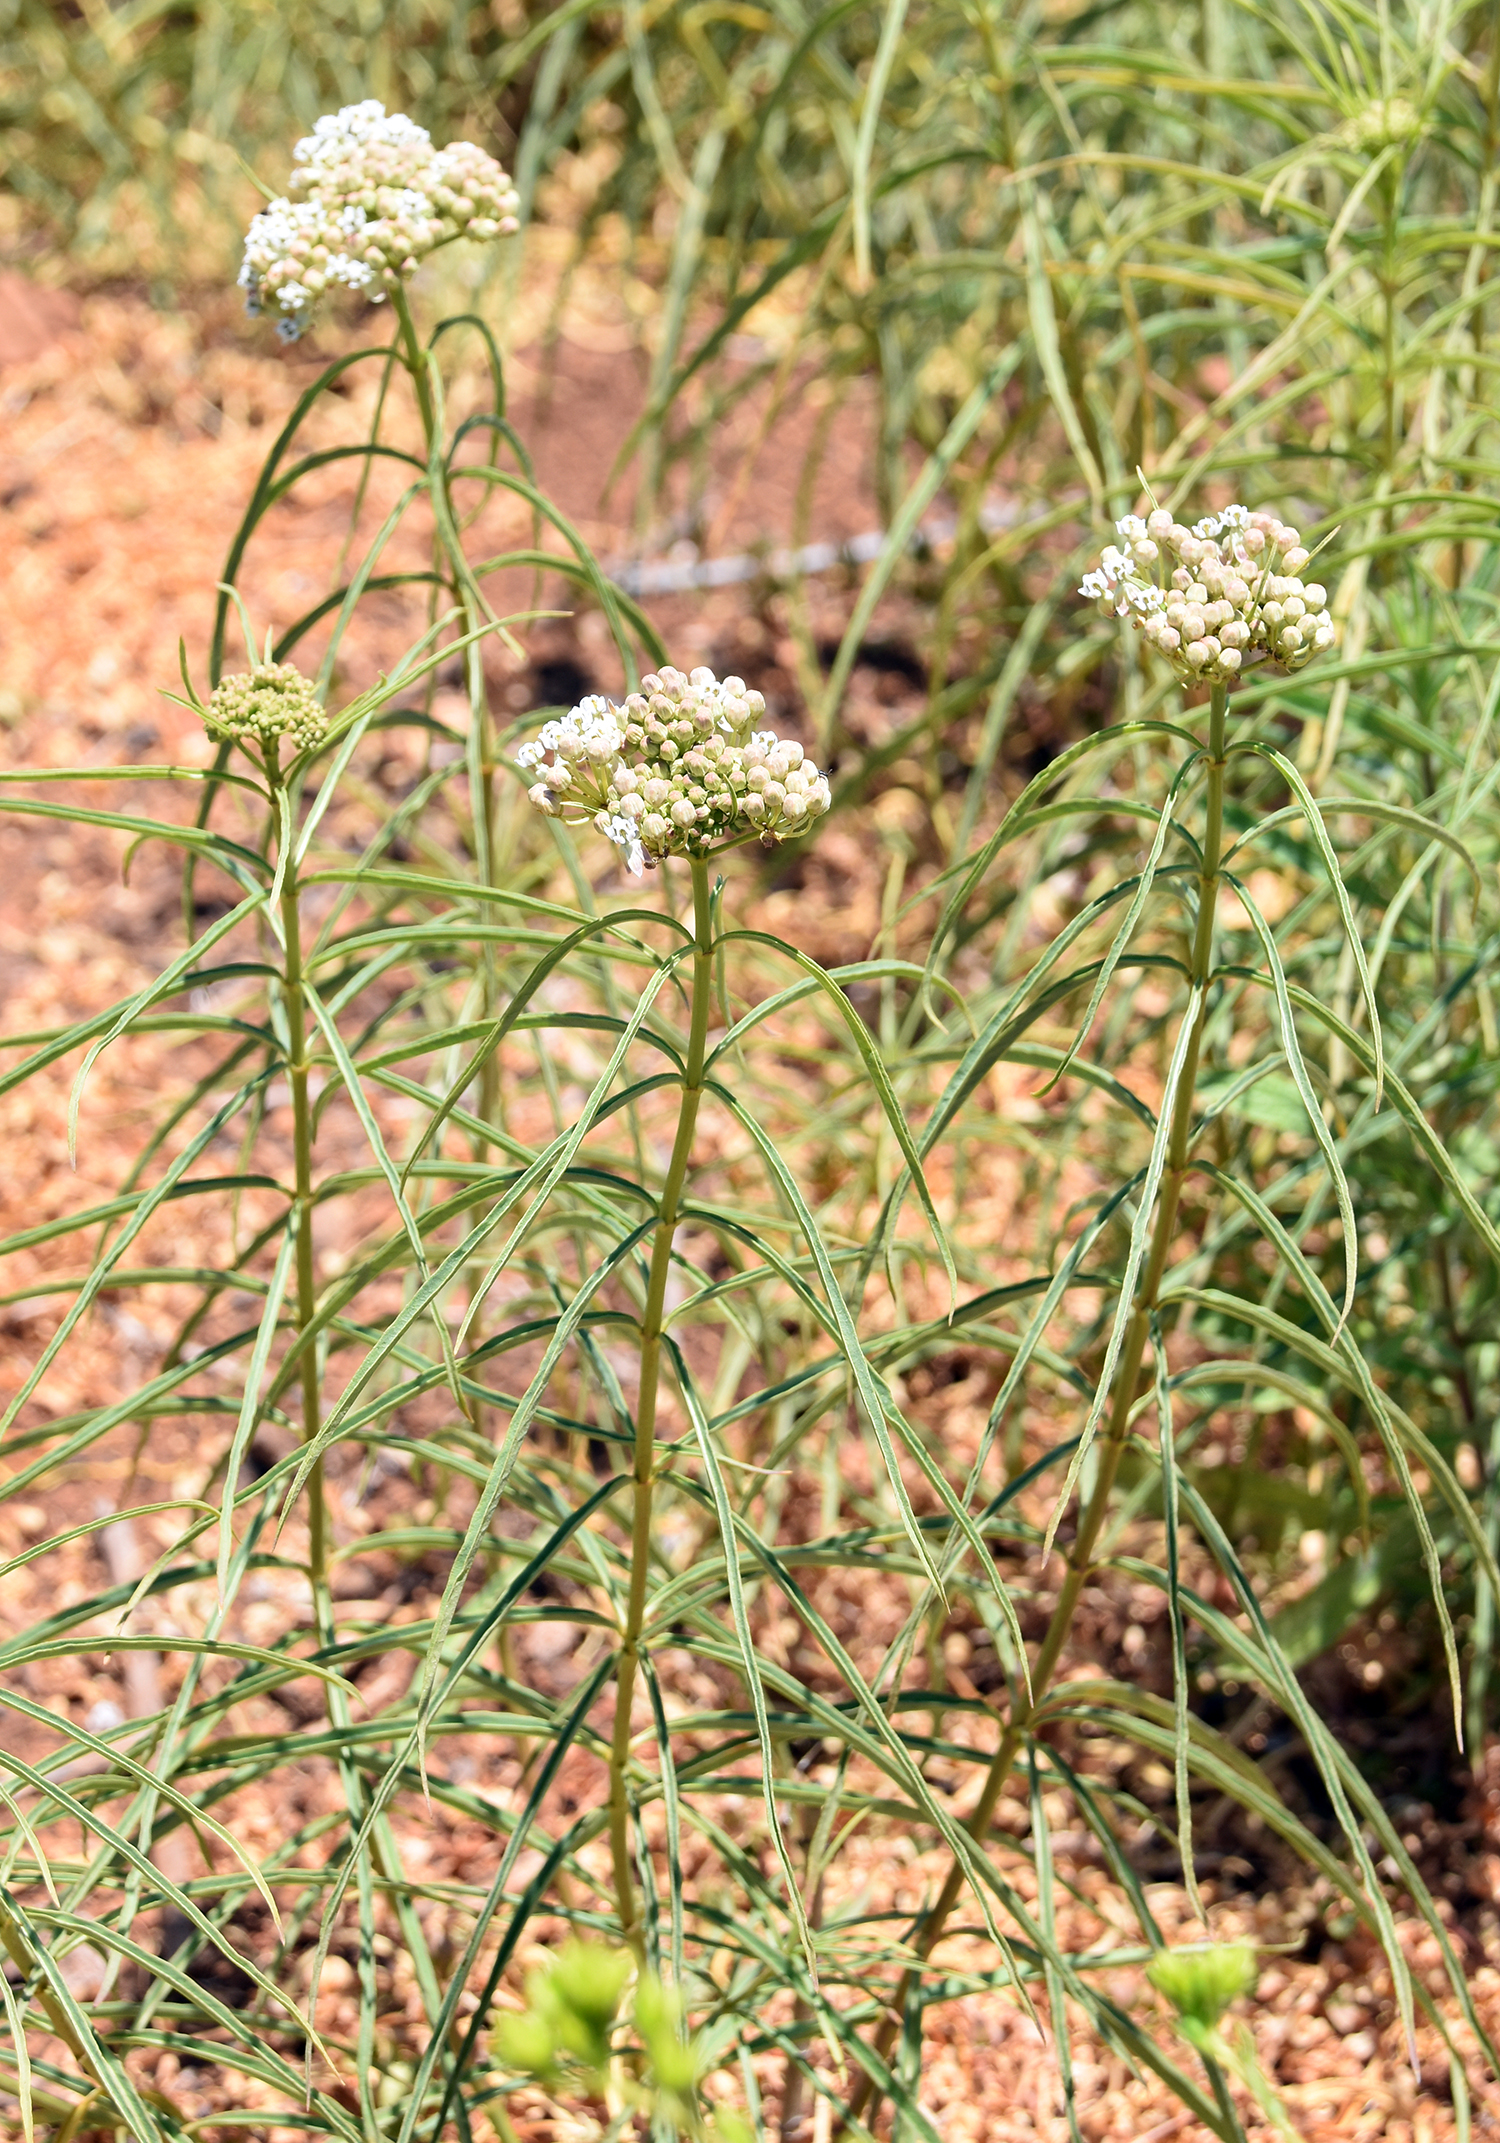 tall green plant with clusters of bulbous white flowers on top